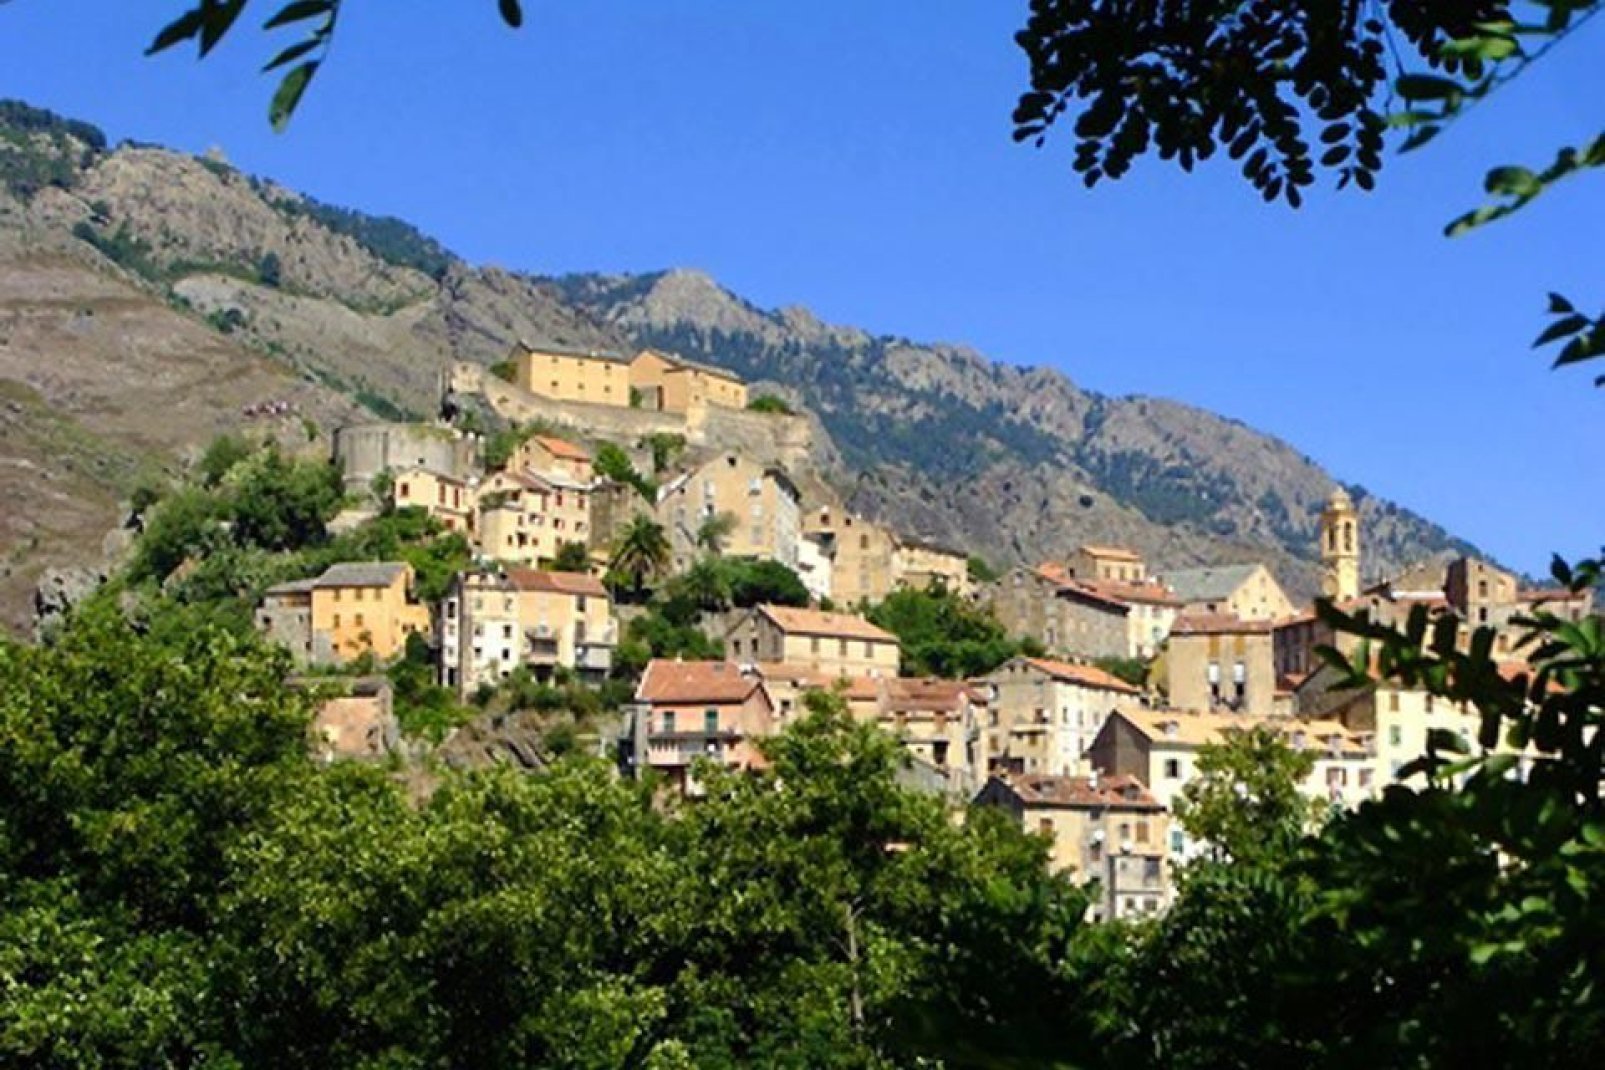 Corte is on the border of northern and southern Corsica.